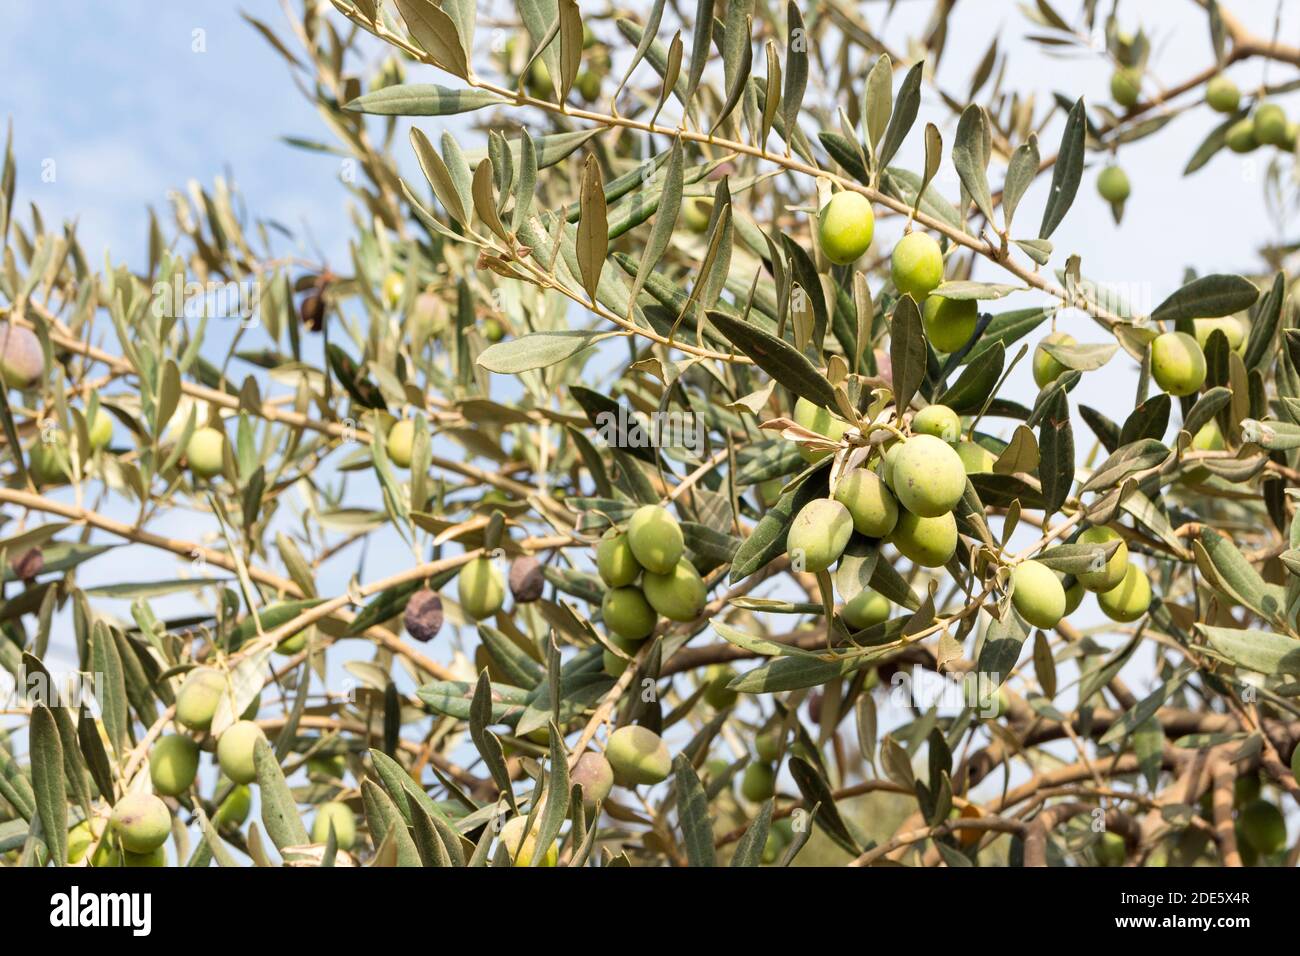 Olive tree (olea europaea) with green olives on branches Stock Photo